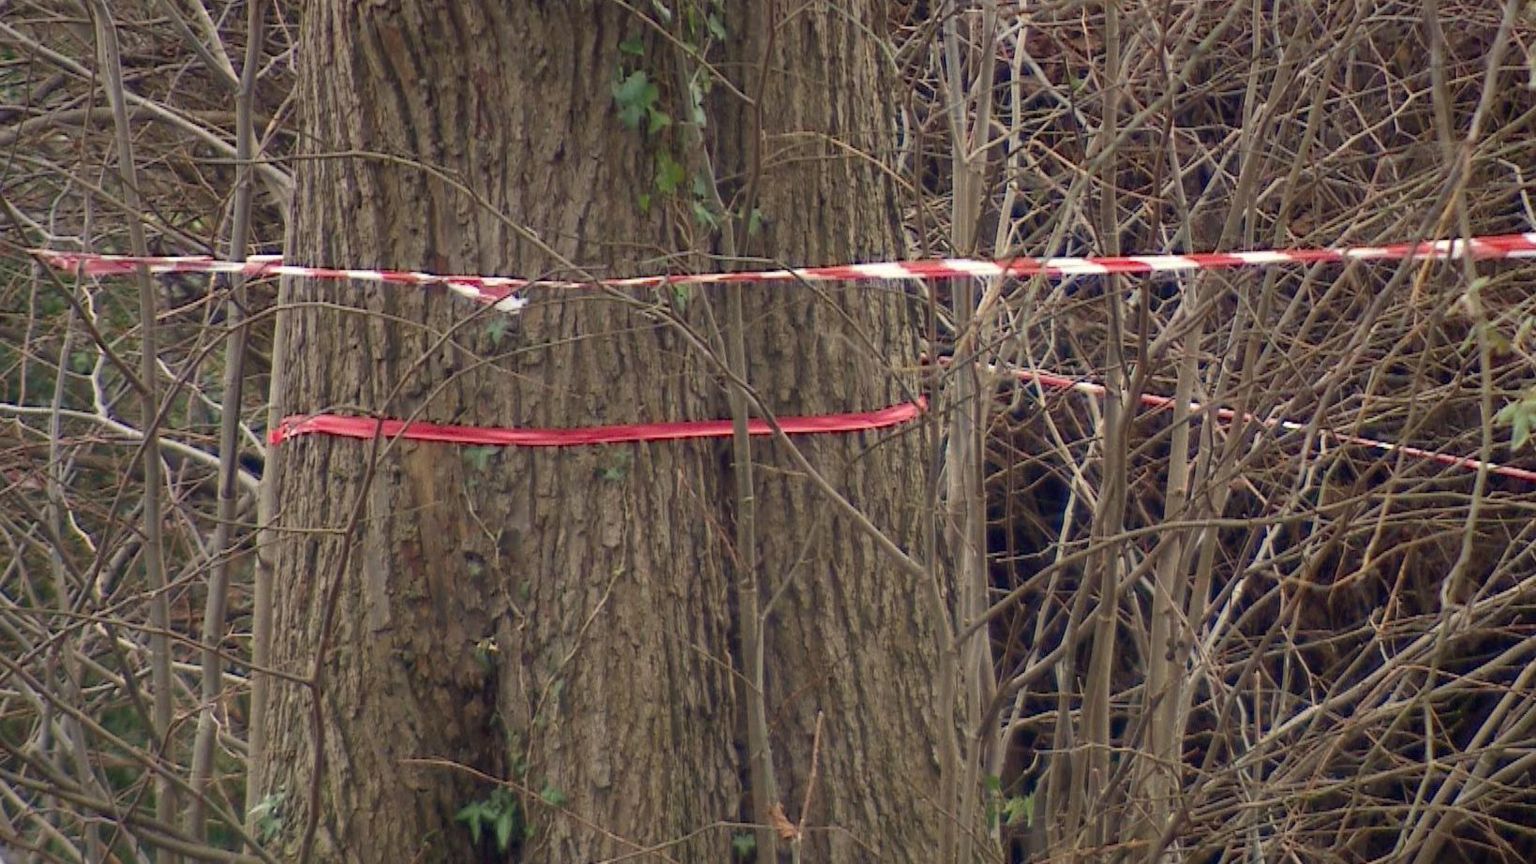 Trees with tape around them in Poynton, Cheshire